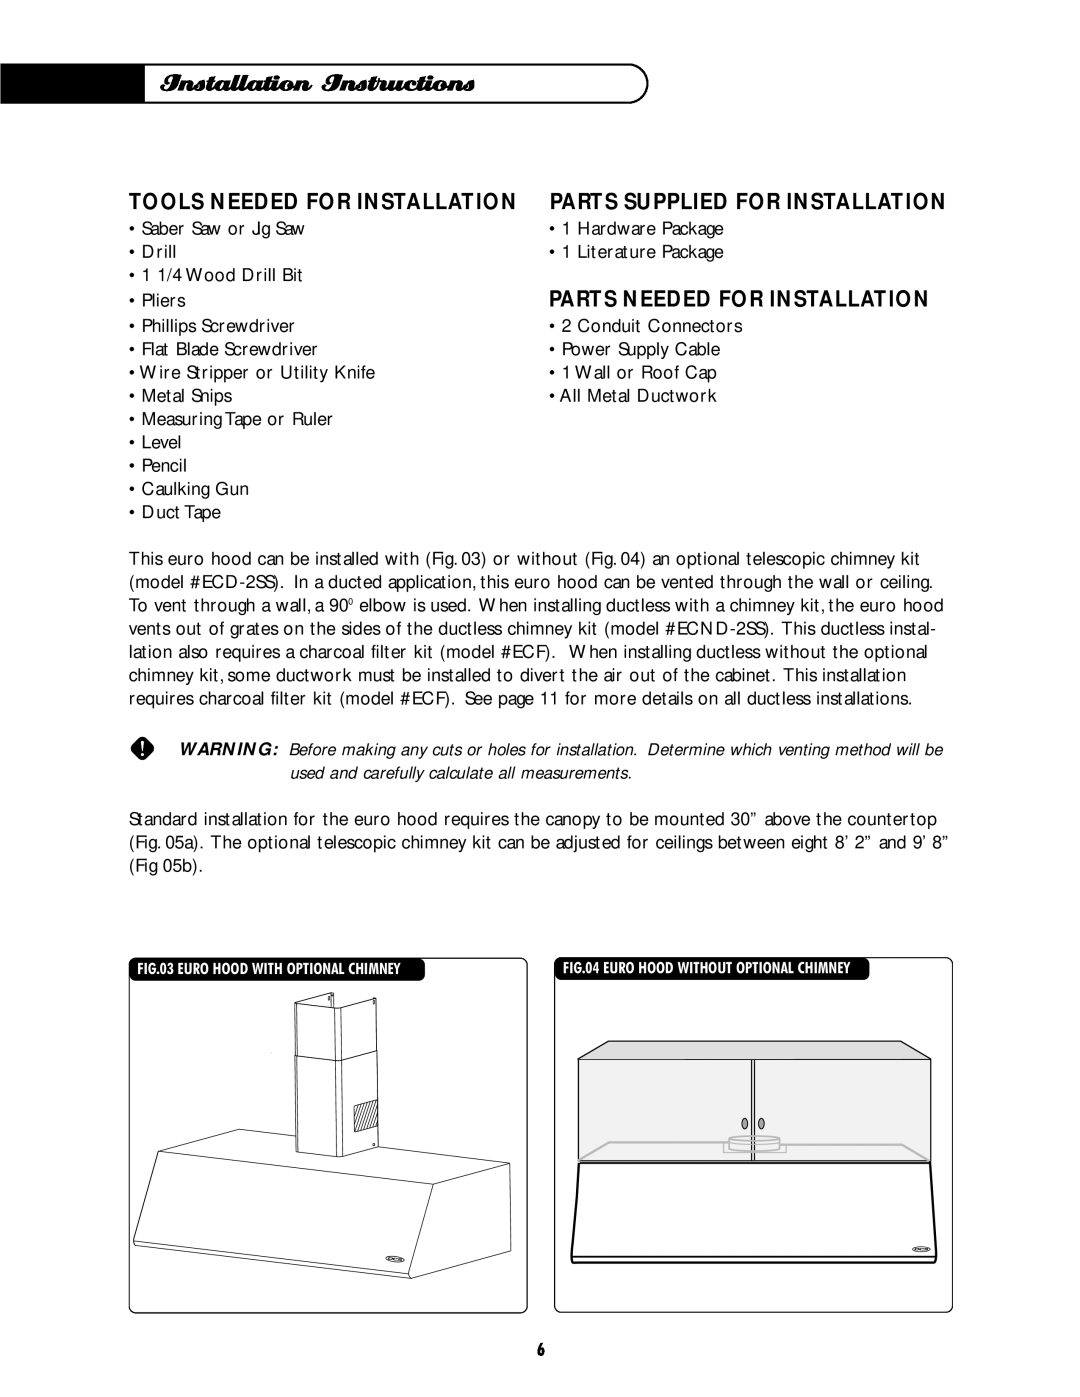 DCS EH-36SS, EH-30SS manual Installation Instructions, Tools Needed For Installation, Parts Needed For Installation 